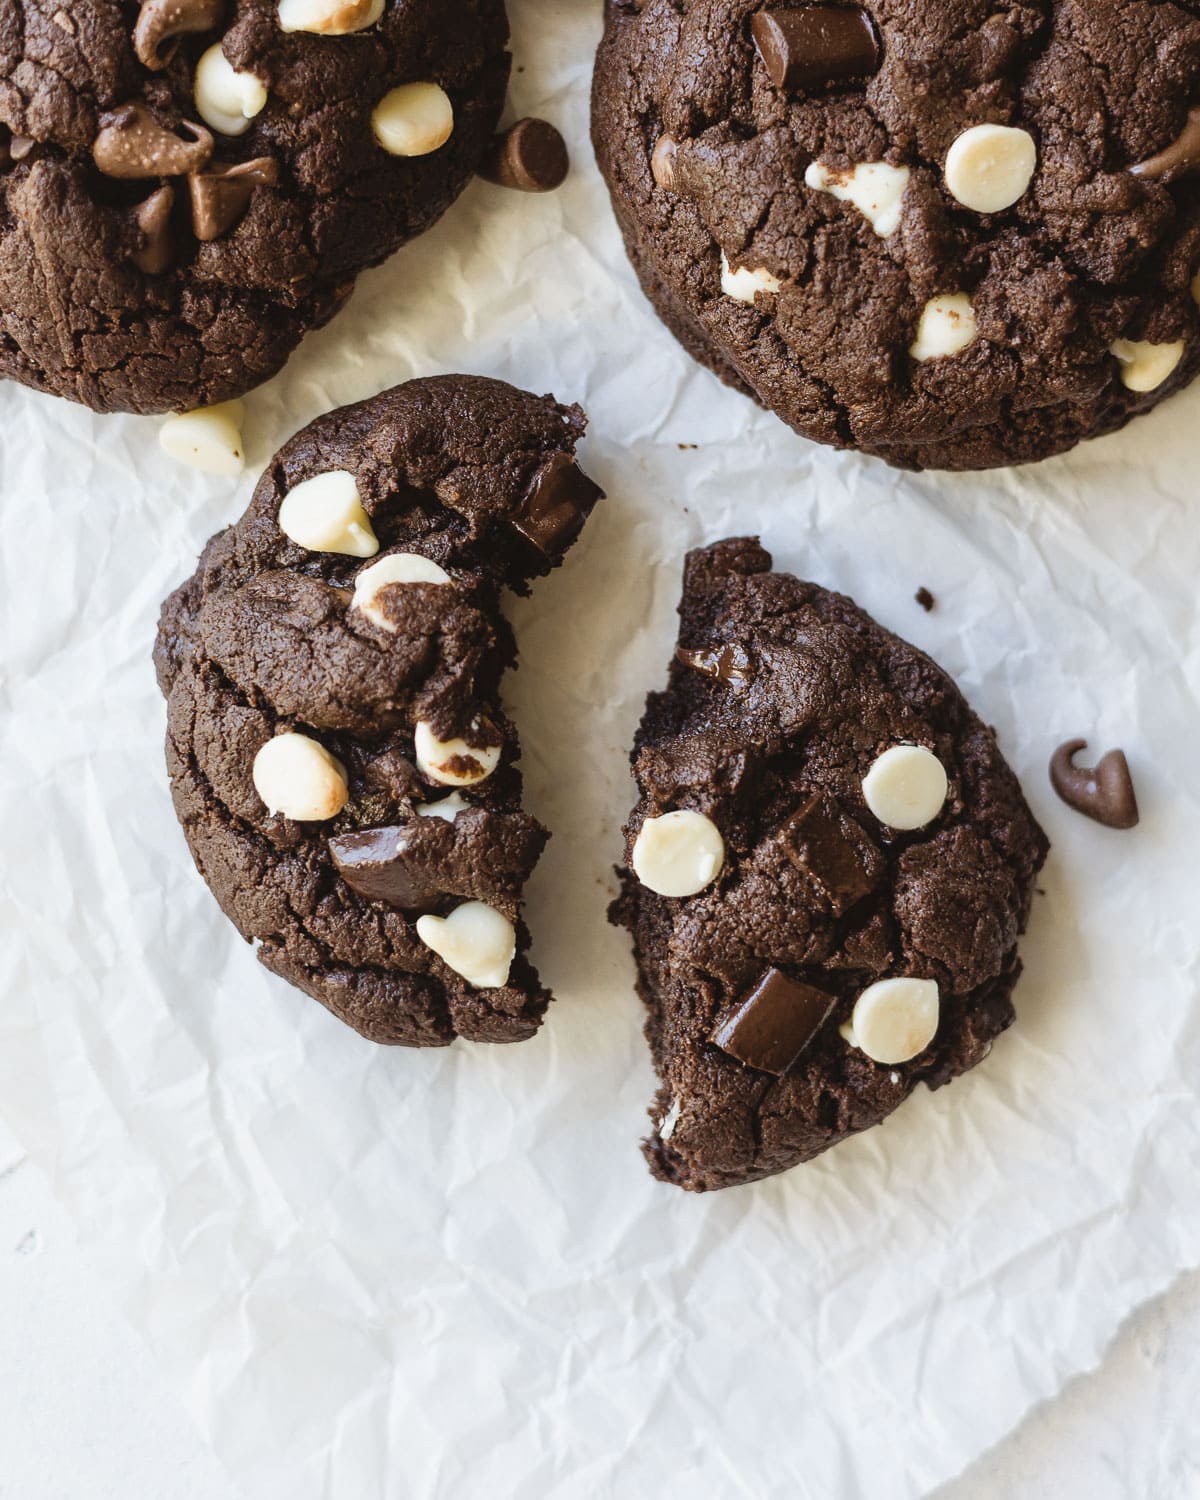 A triple chocolate cookie split in half on a piece of crinkled parchment paper.